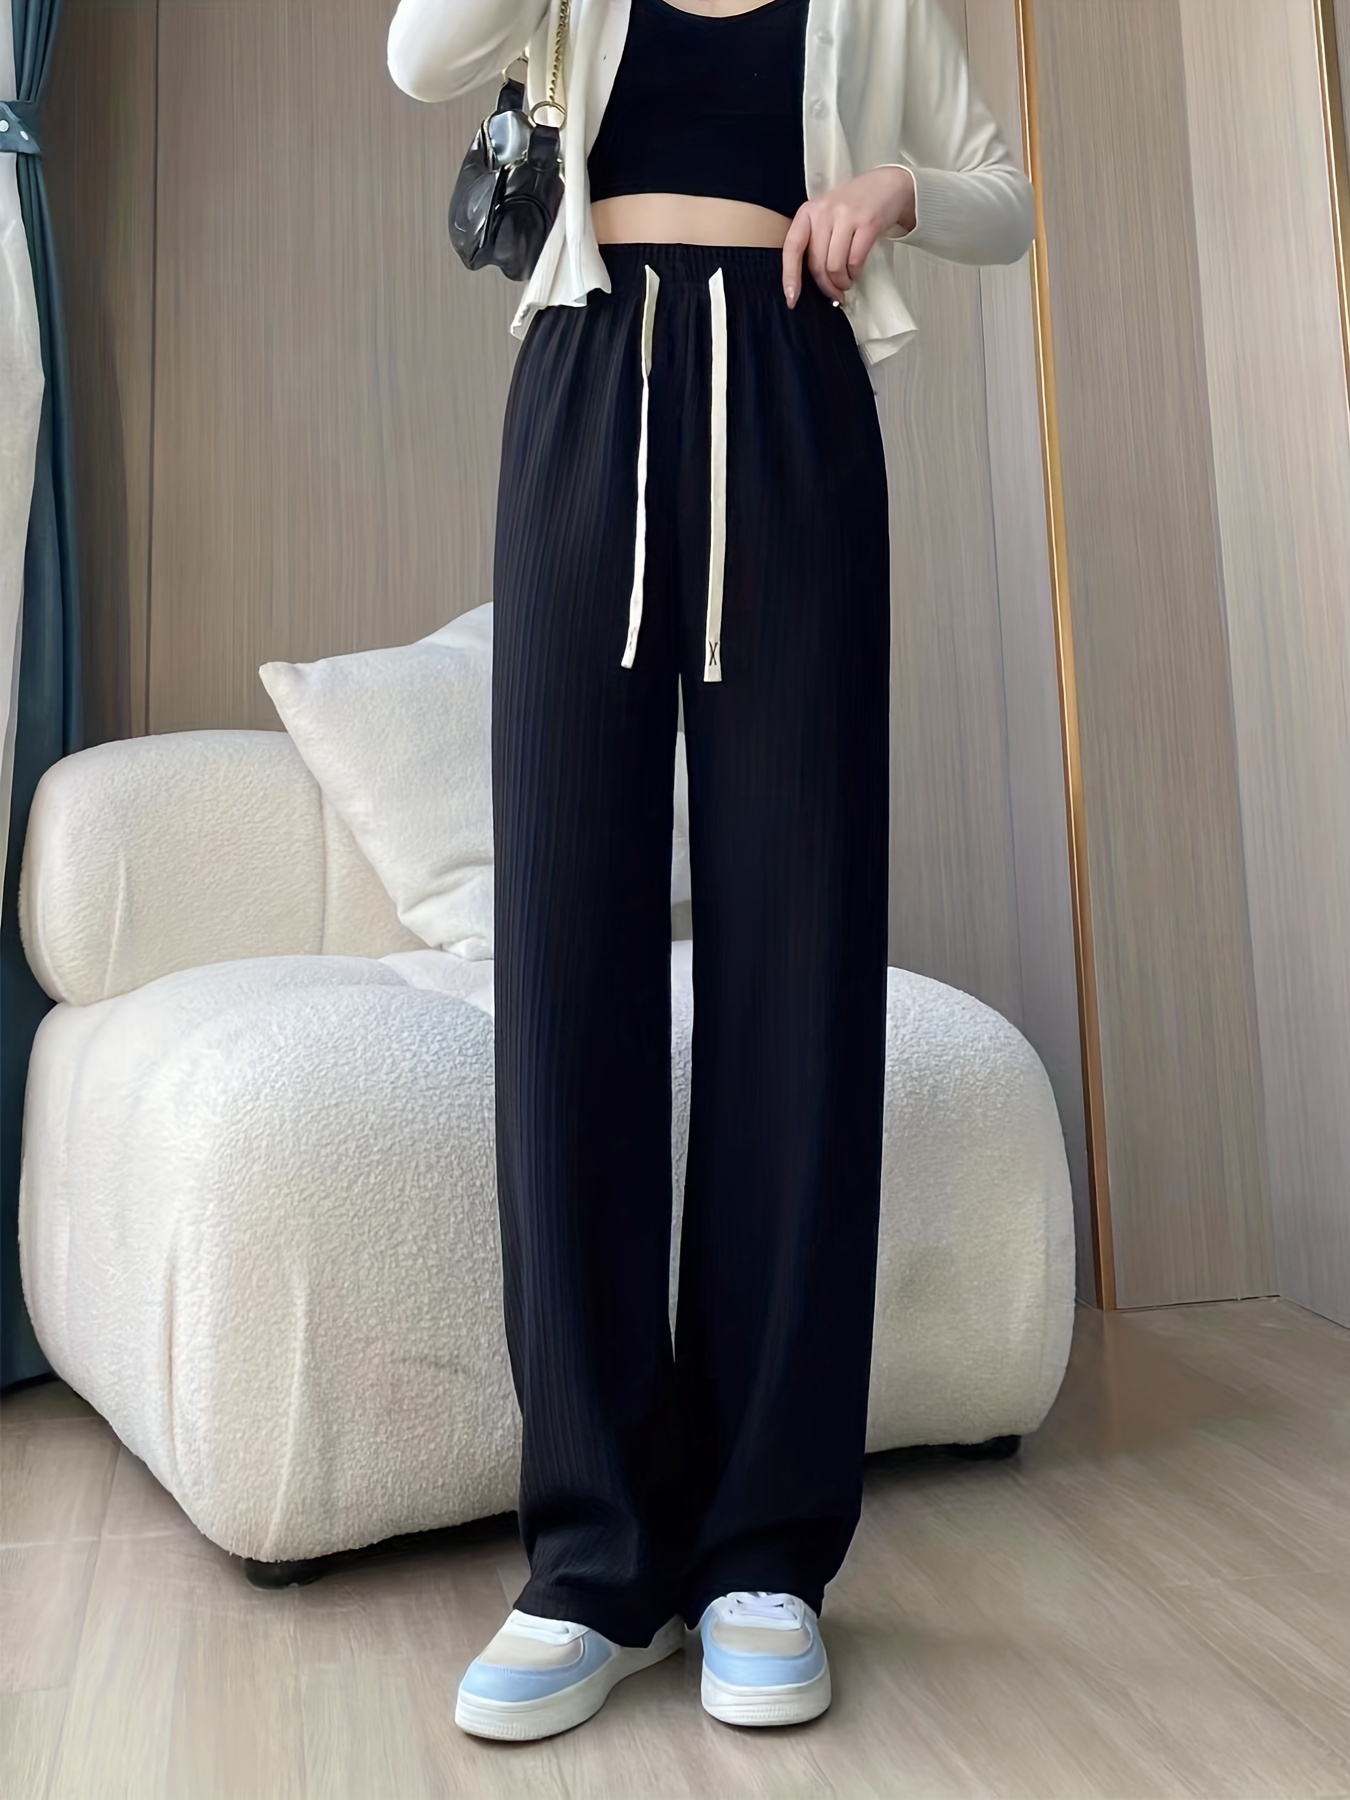 Cathalem Warm up Pants Womens Casual Solid High Waisted Loose Wide Leg Cozy  Pants Comfy Straight Women Pants Casual Elastic Waist Pants GY1 X-Large 